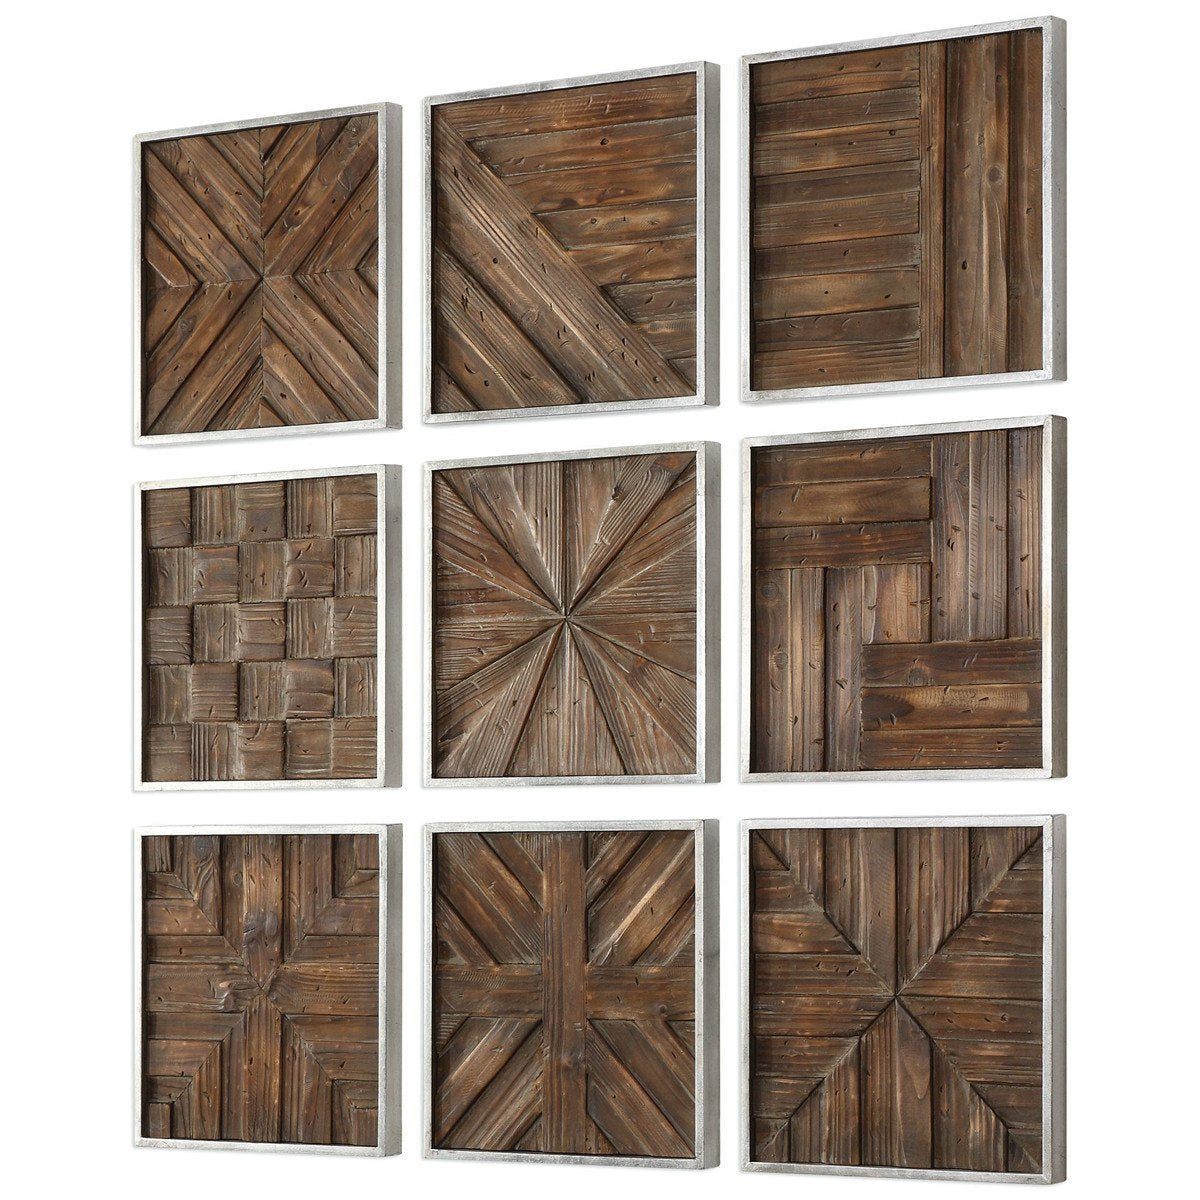 Uttermost Bryndle Rustic Wooden Squares, 9-Piece Set